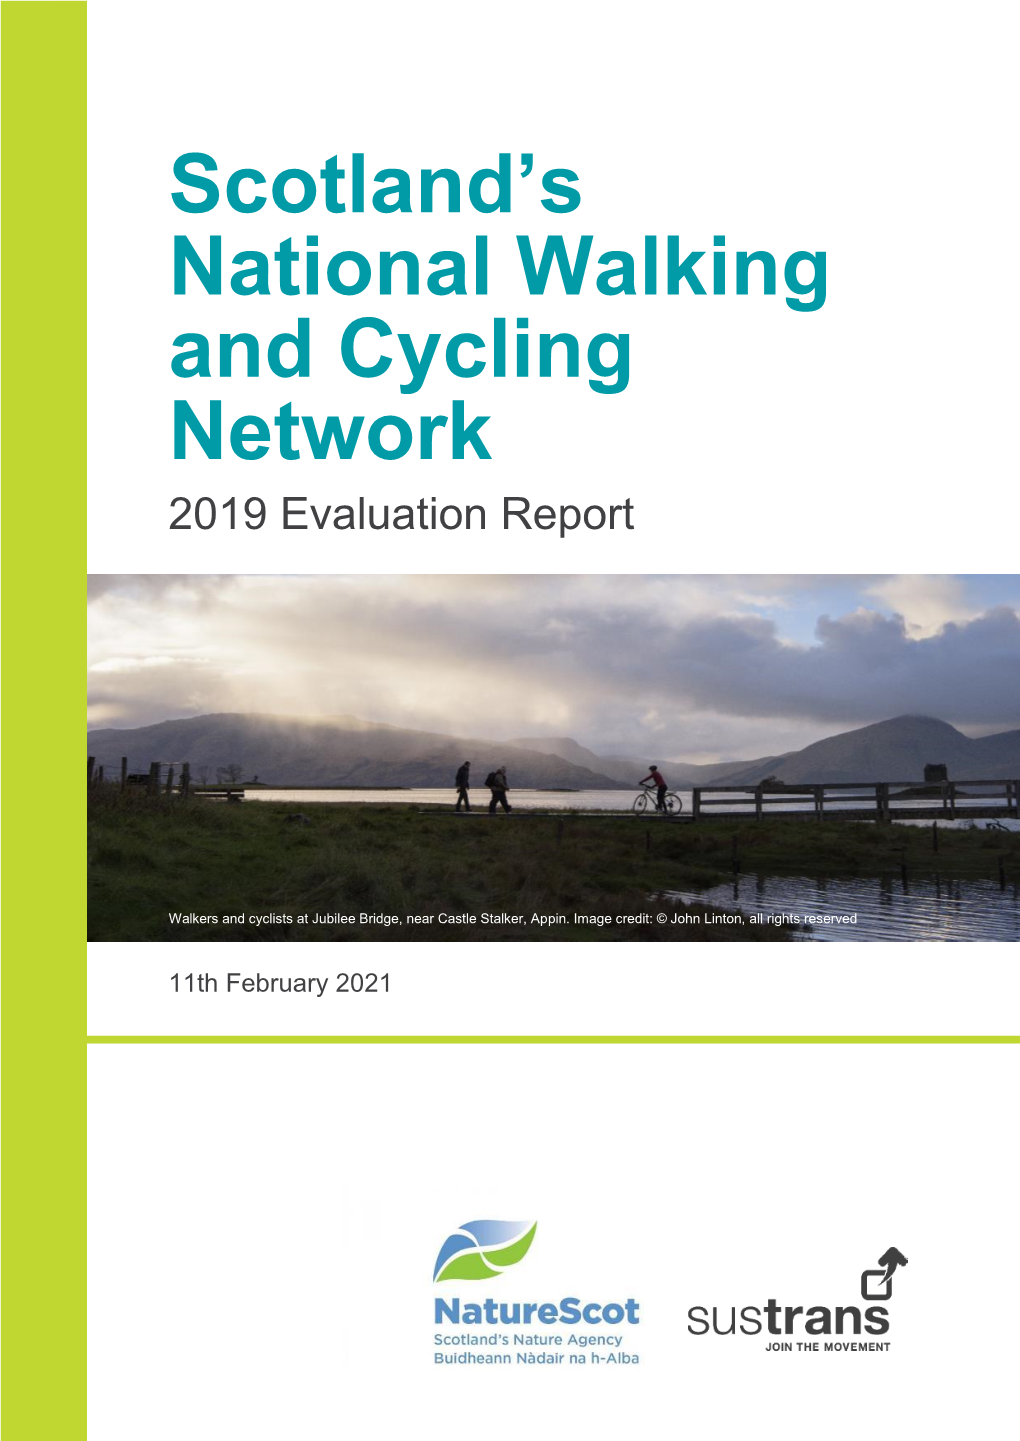 Scotland's National Walking and Cycling Network